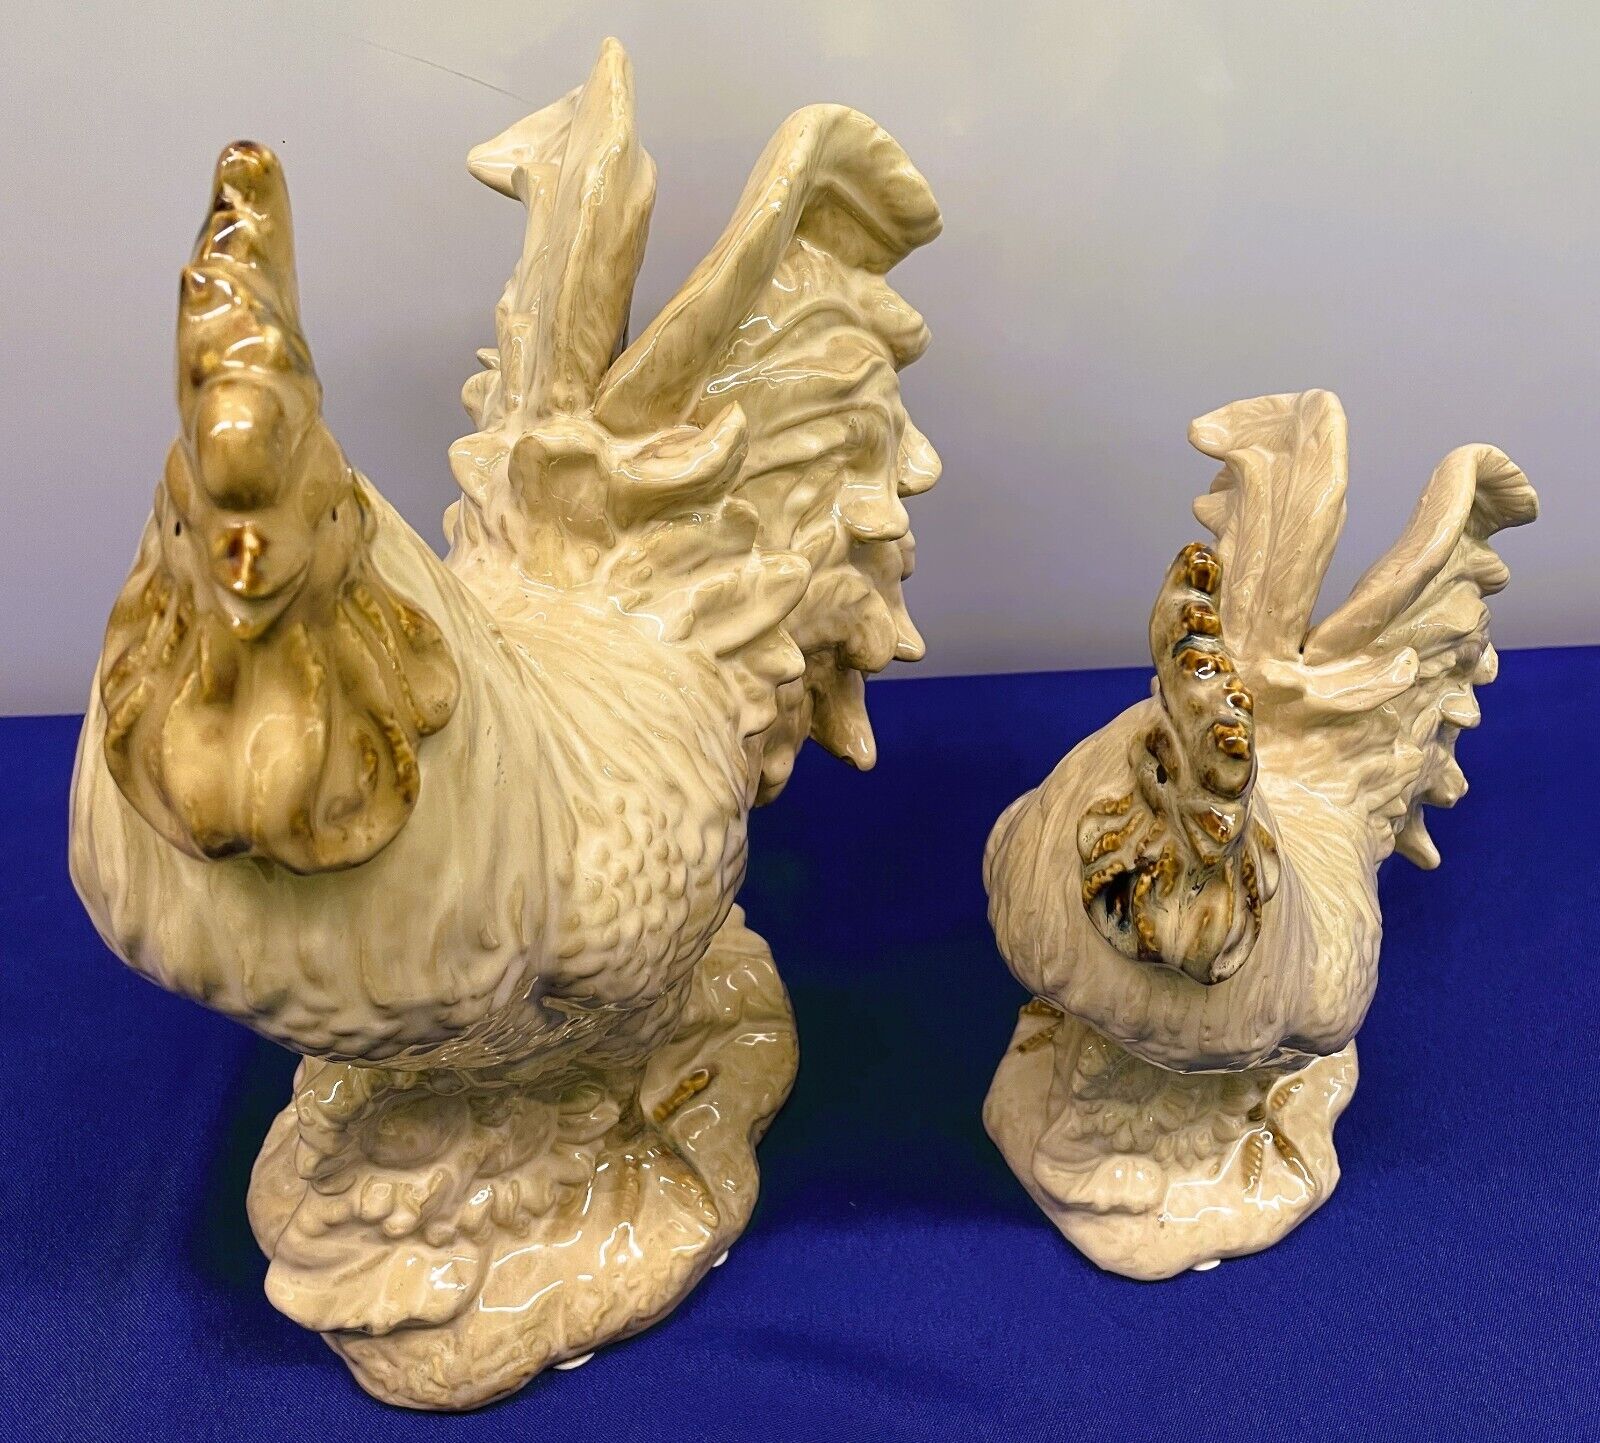 ADORABLE VTG PAIR OF CERAMIC ROOSTERS